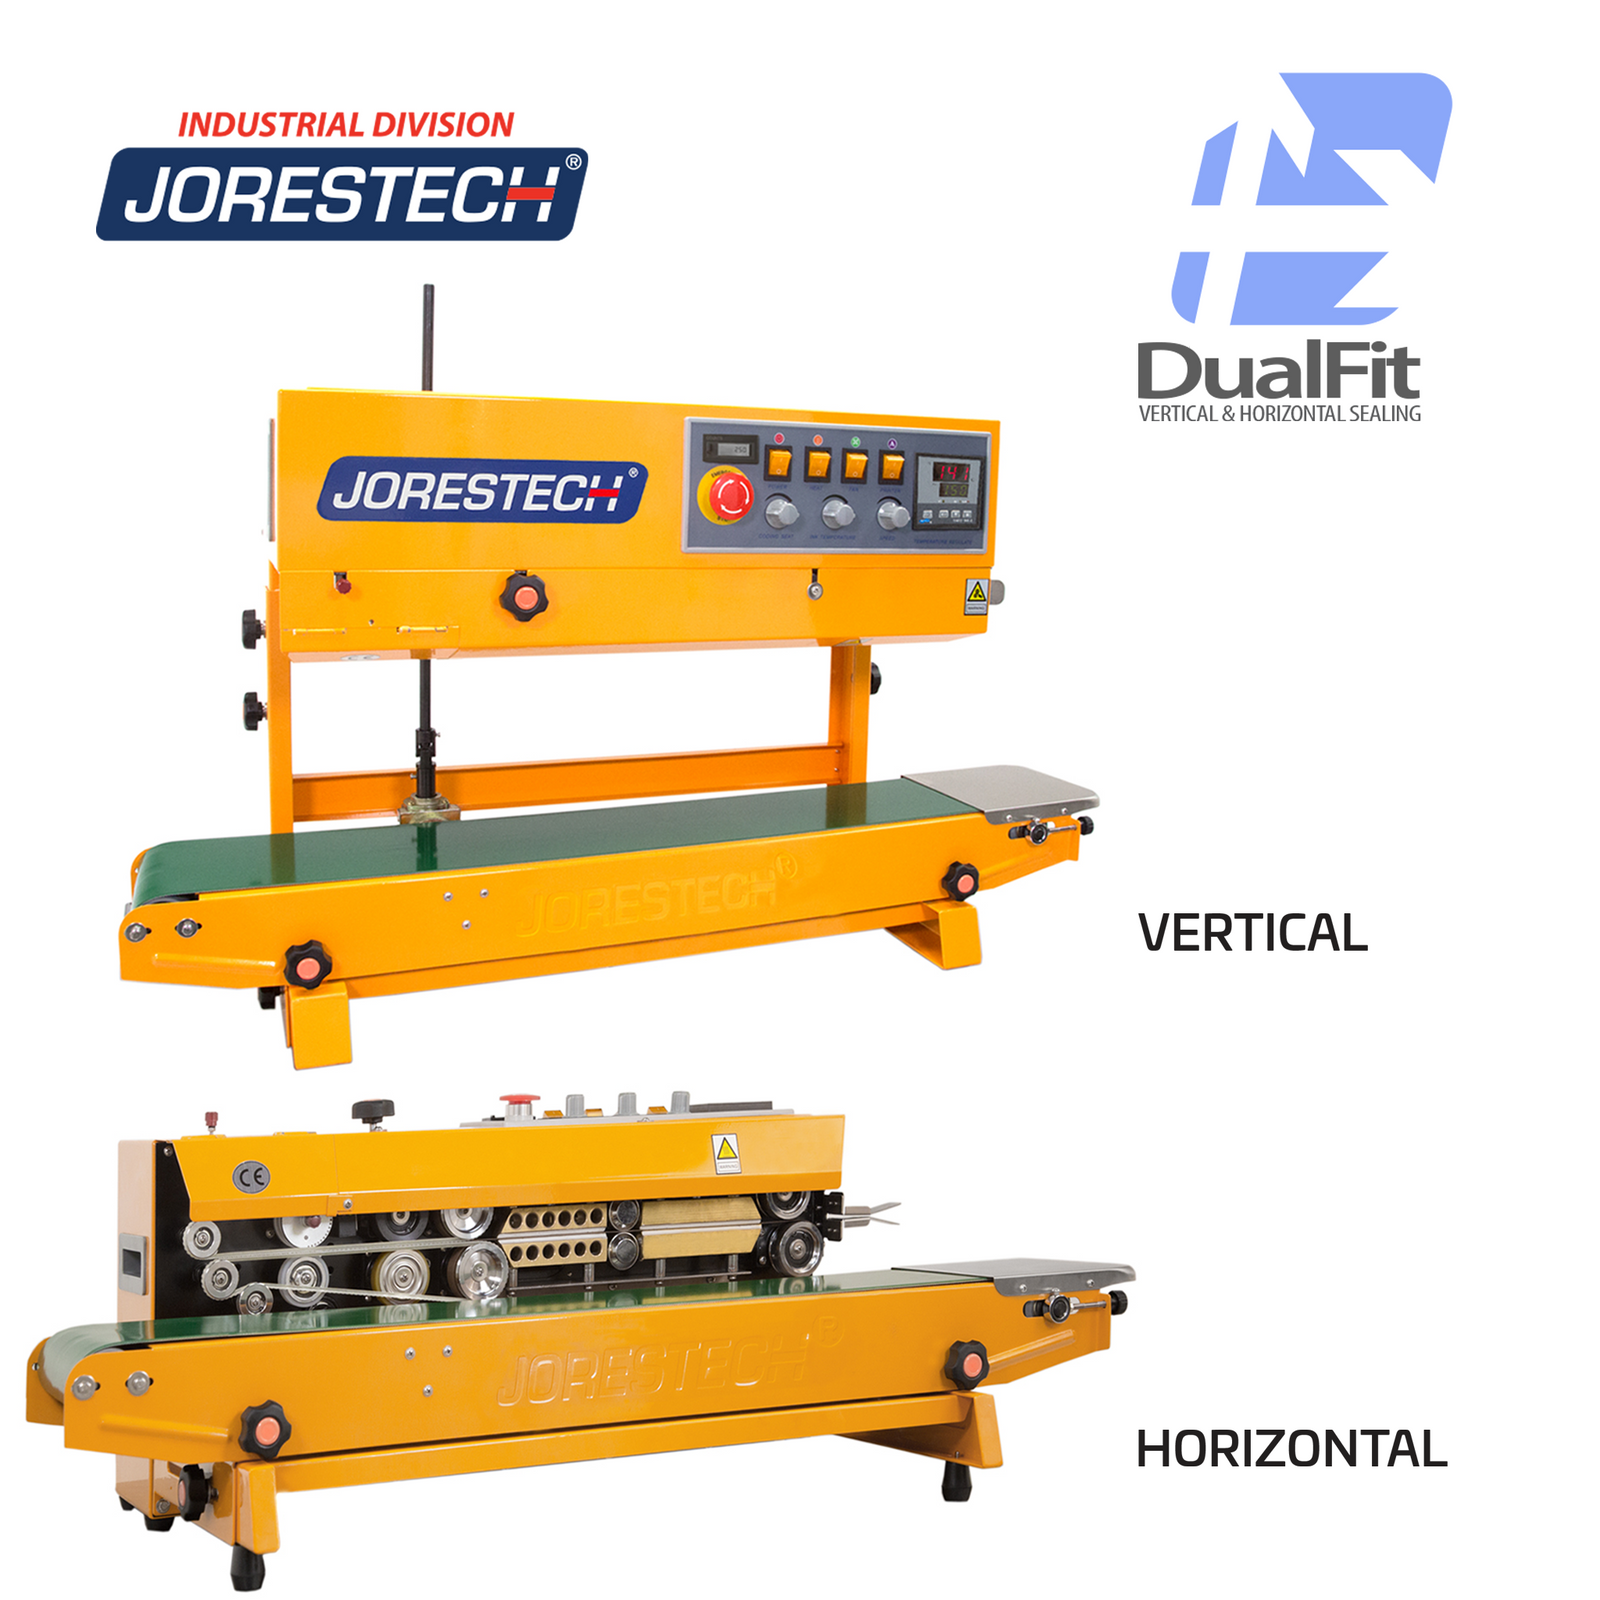 vertical and horizontal positioning of the continuous band sealer machine. Dual fit logo with 2 arrows beside the 2 details of the band sealers shows how this JORES TECHNOLOGIES® continuous band sealer can be used for vertical and for horizontal applications.